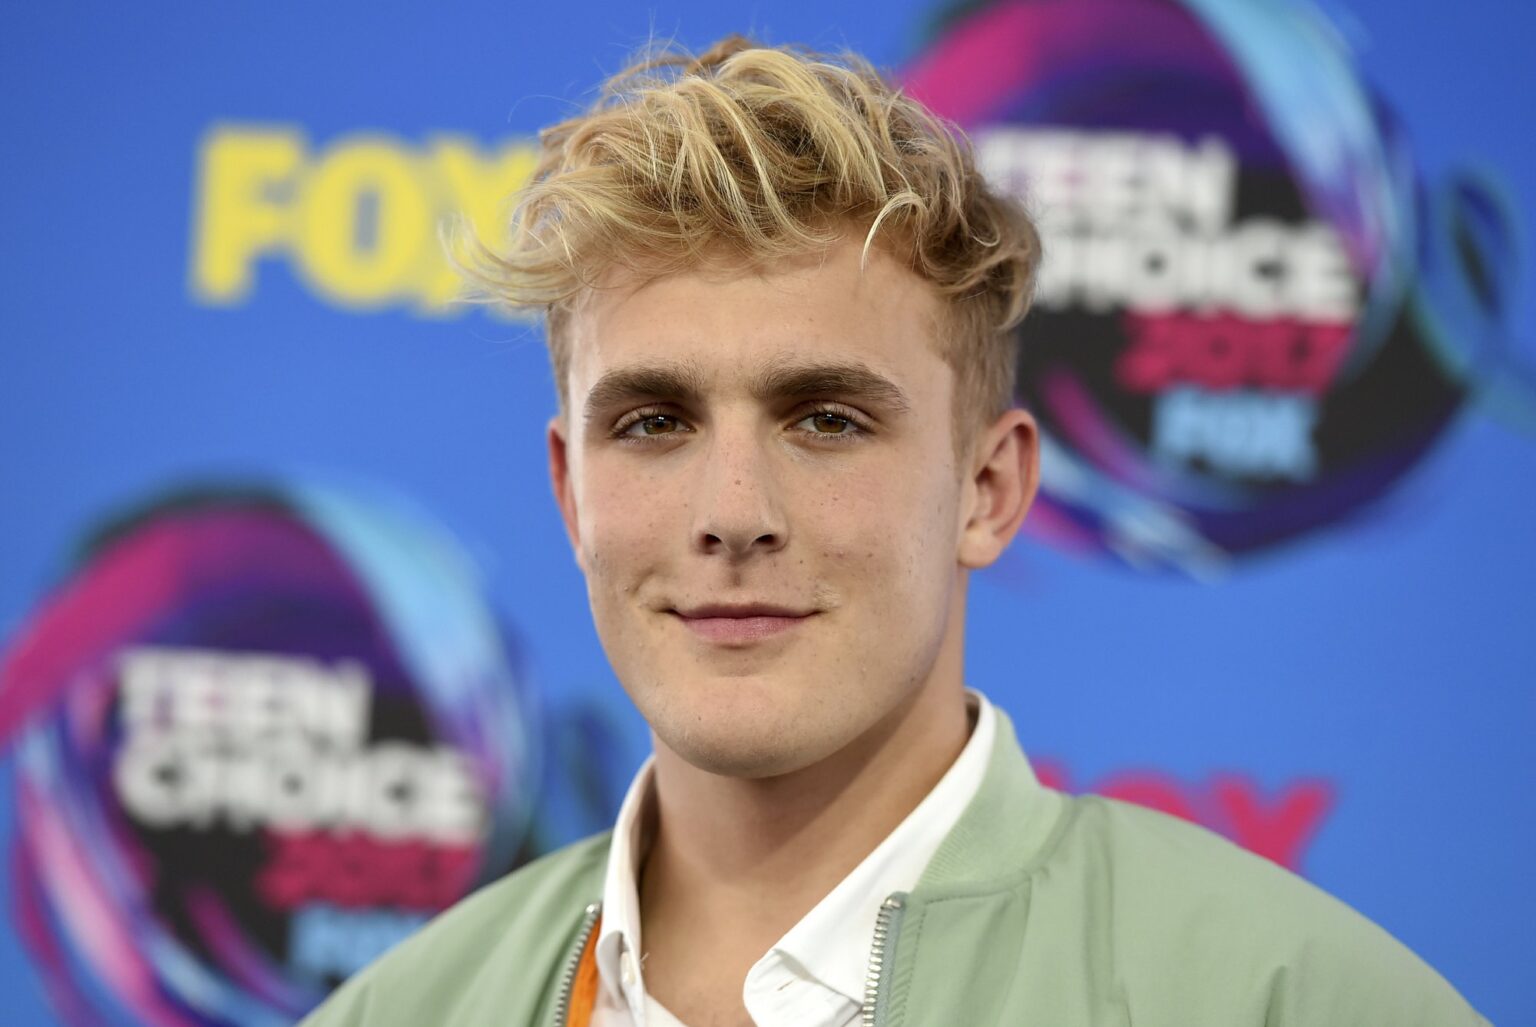 TikTok star accuses YouTube star Jake Paul of sexual assault. But just what did the Team 10 creator allegedly do to Justine Paradise? Let's delve in.